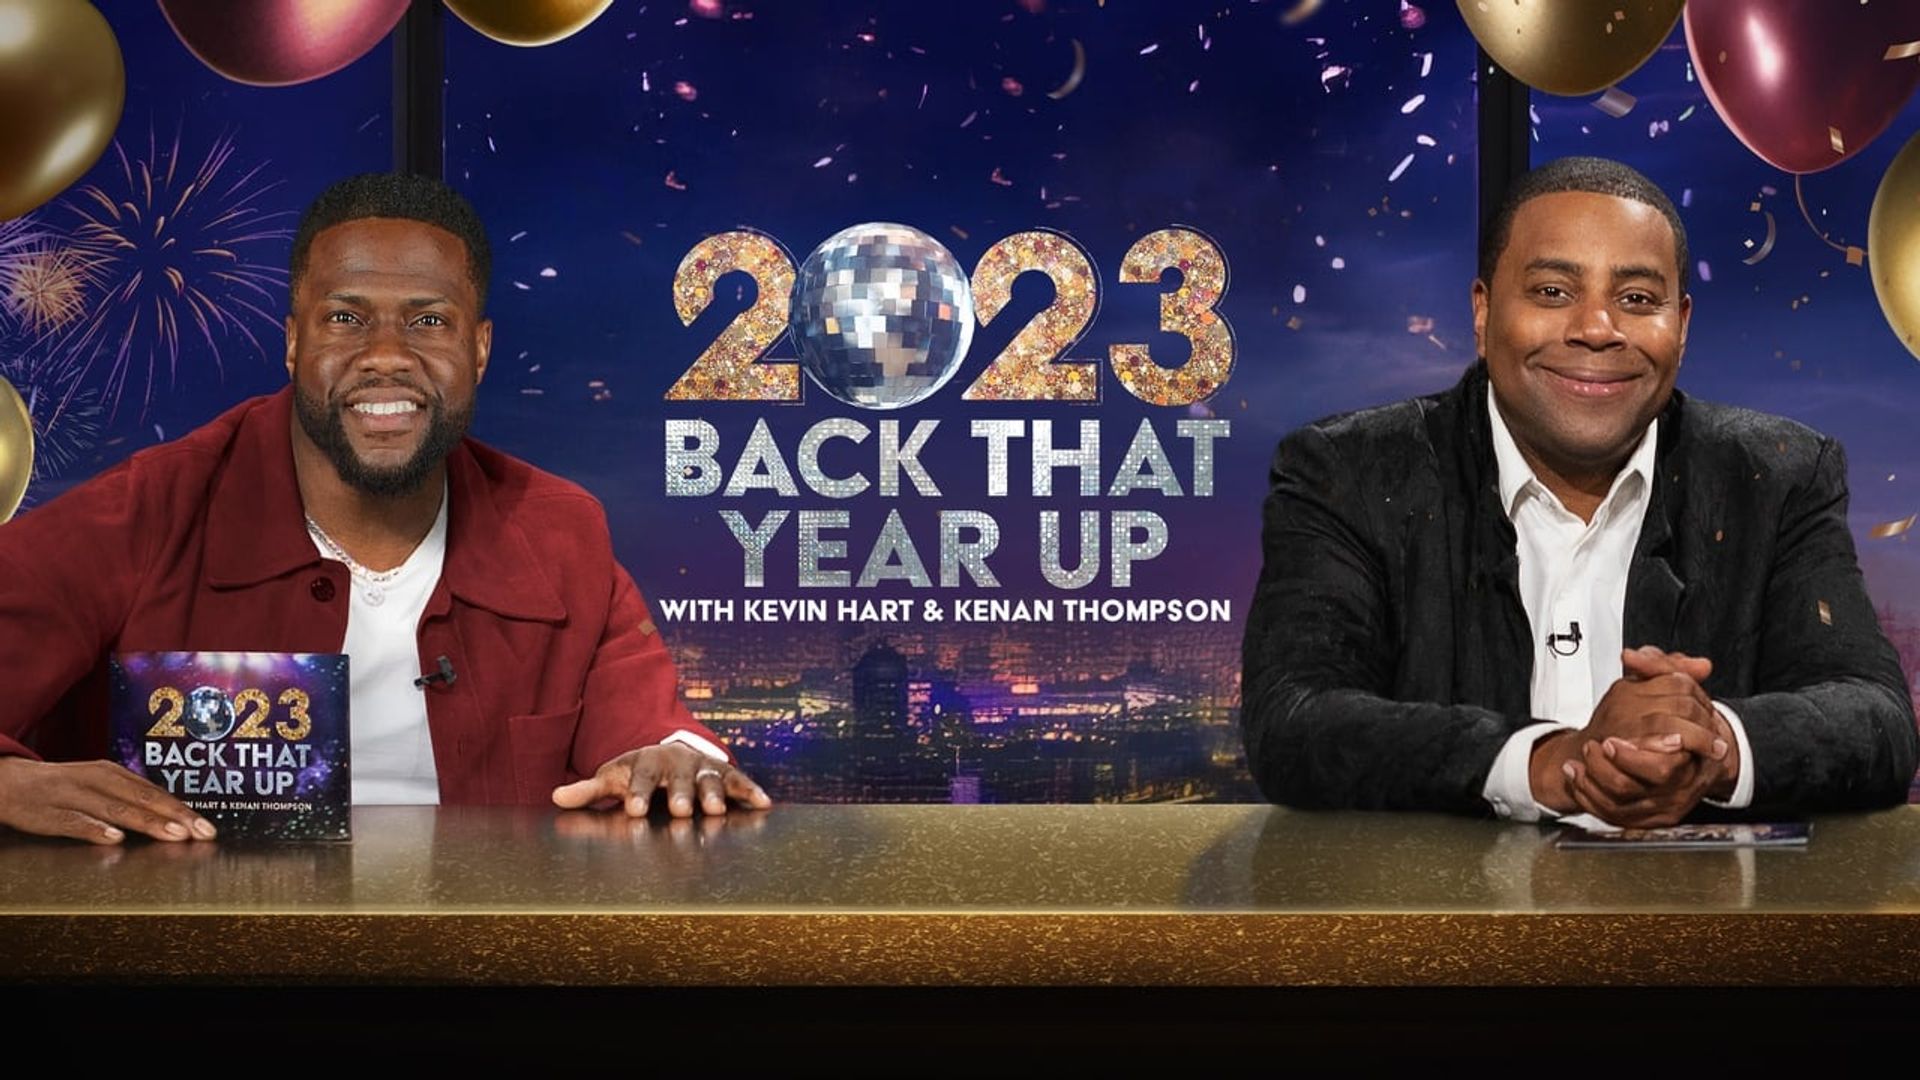 2023: Back That Year Up background